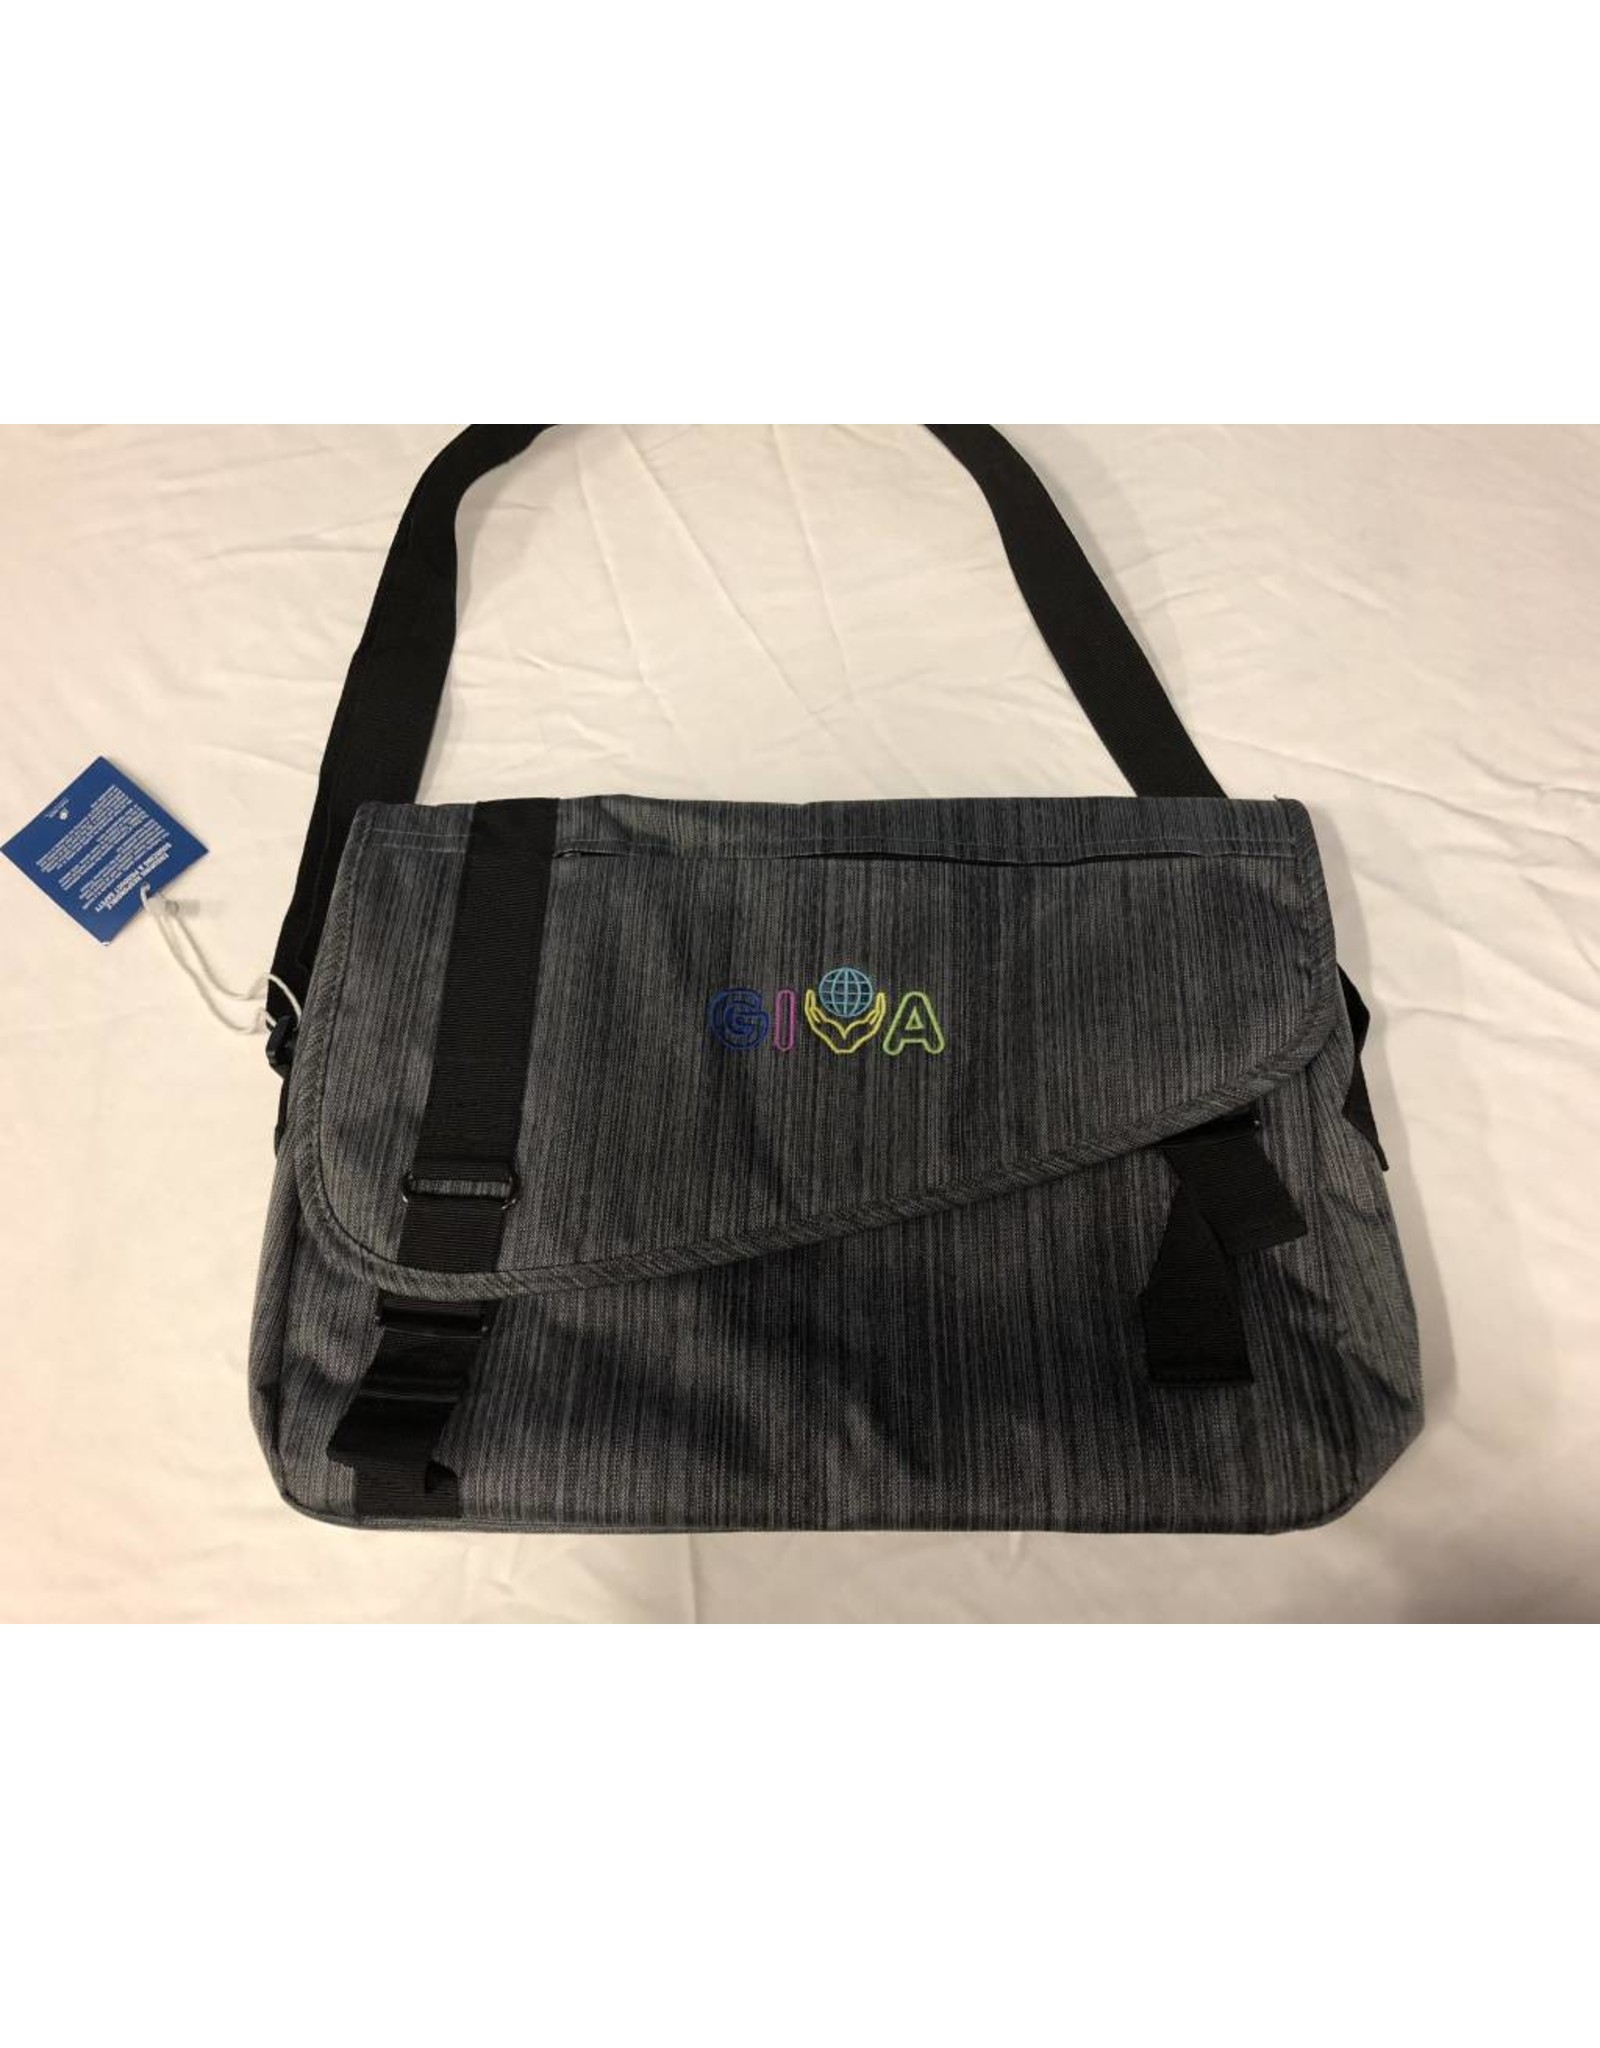 Computer Bag w/ Embroidery